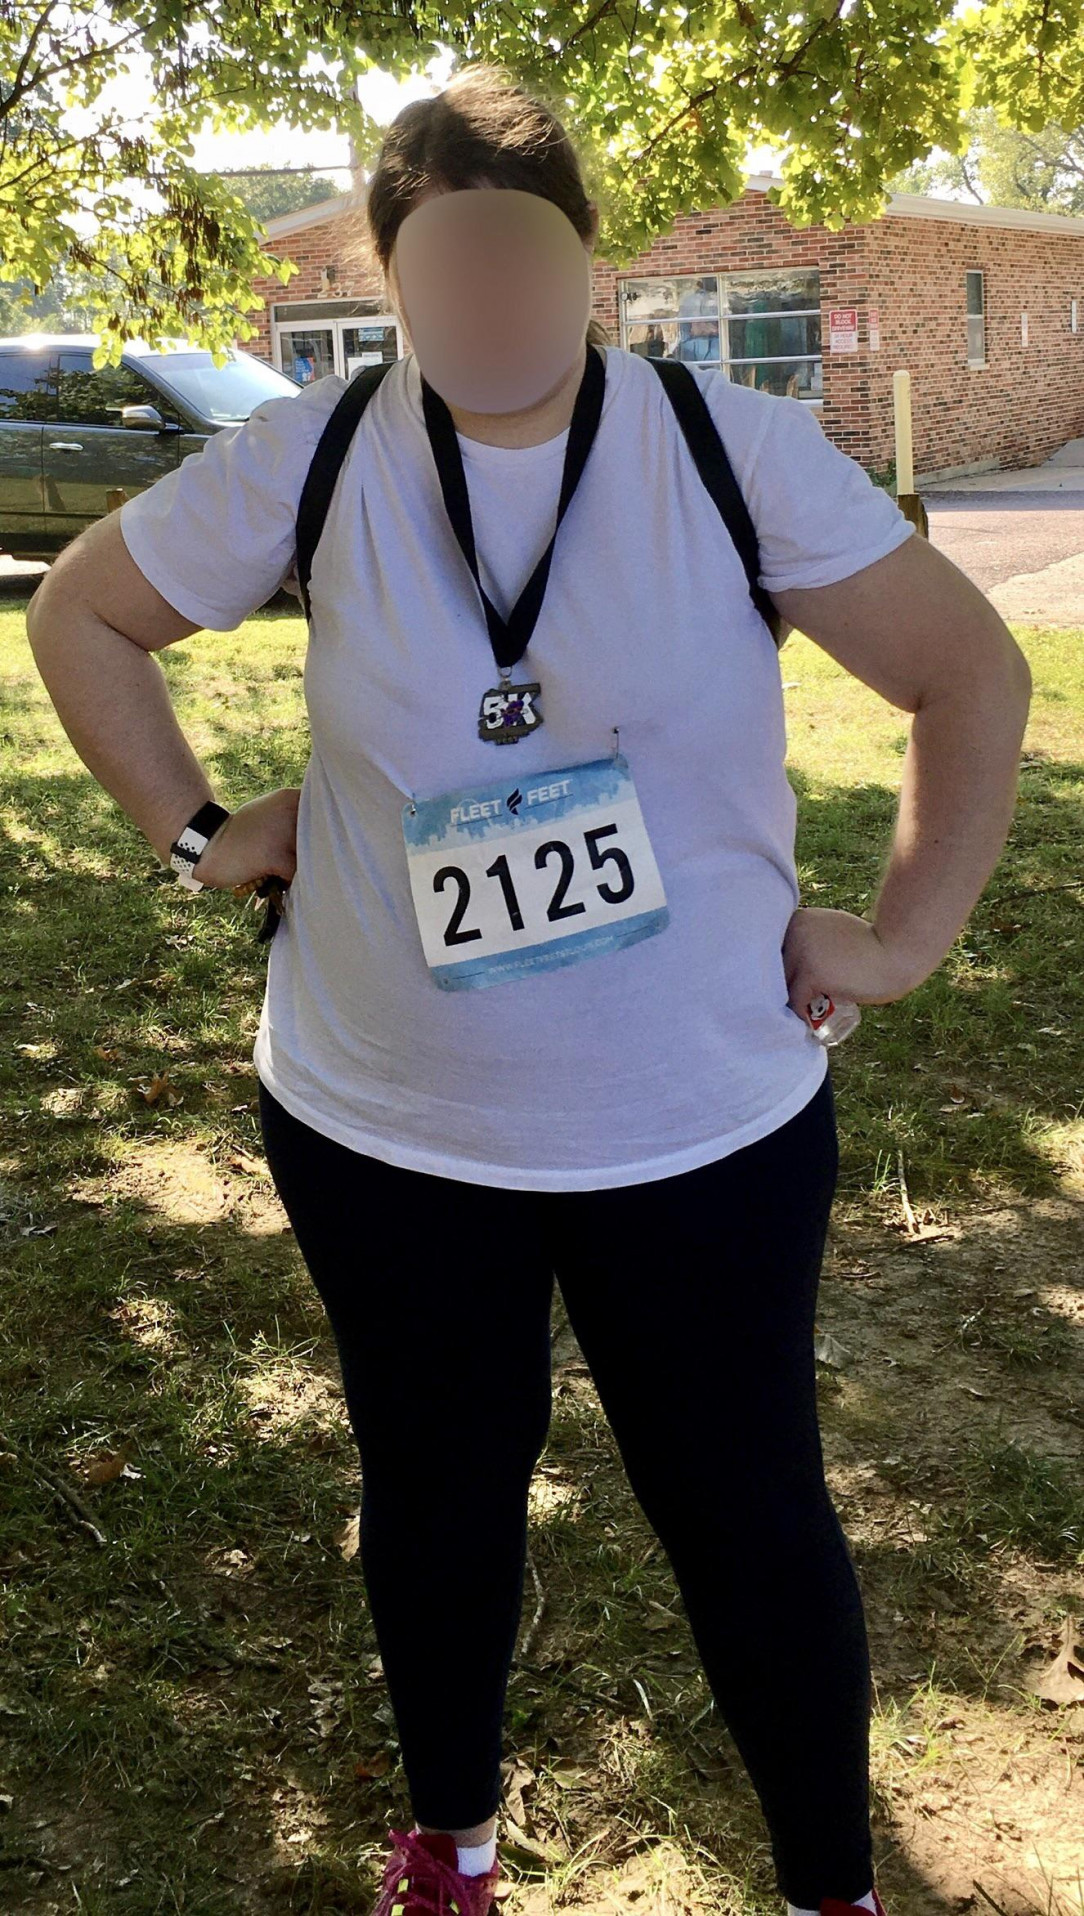 I’m a fat girl (240 lb, ) and I just walked a 5K!